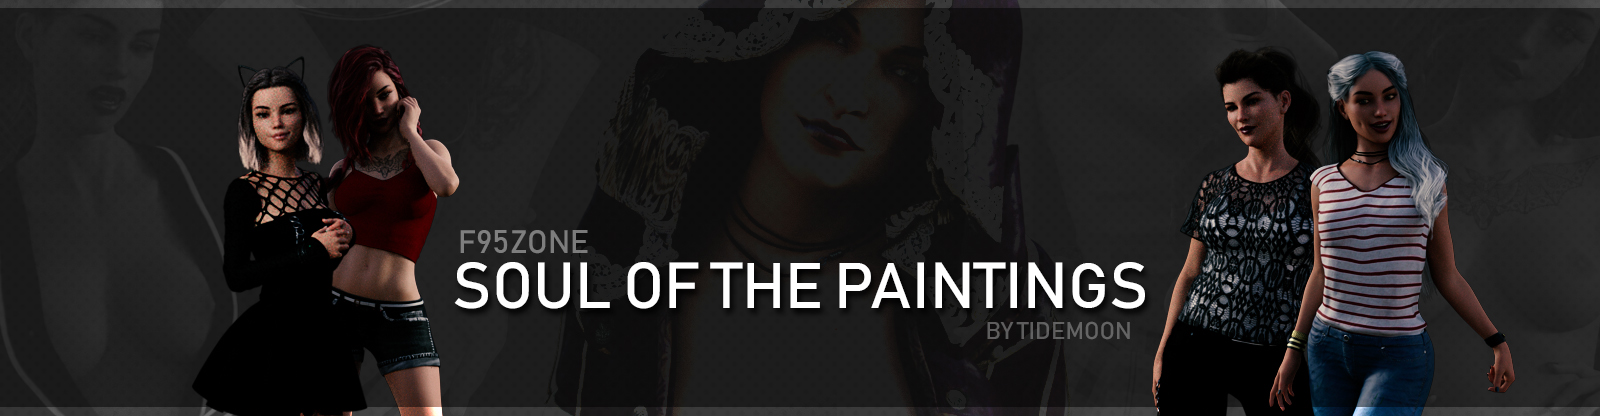 Soul Of The Paintings poster